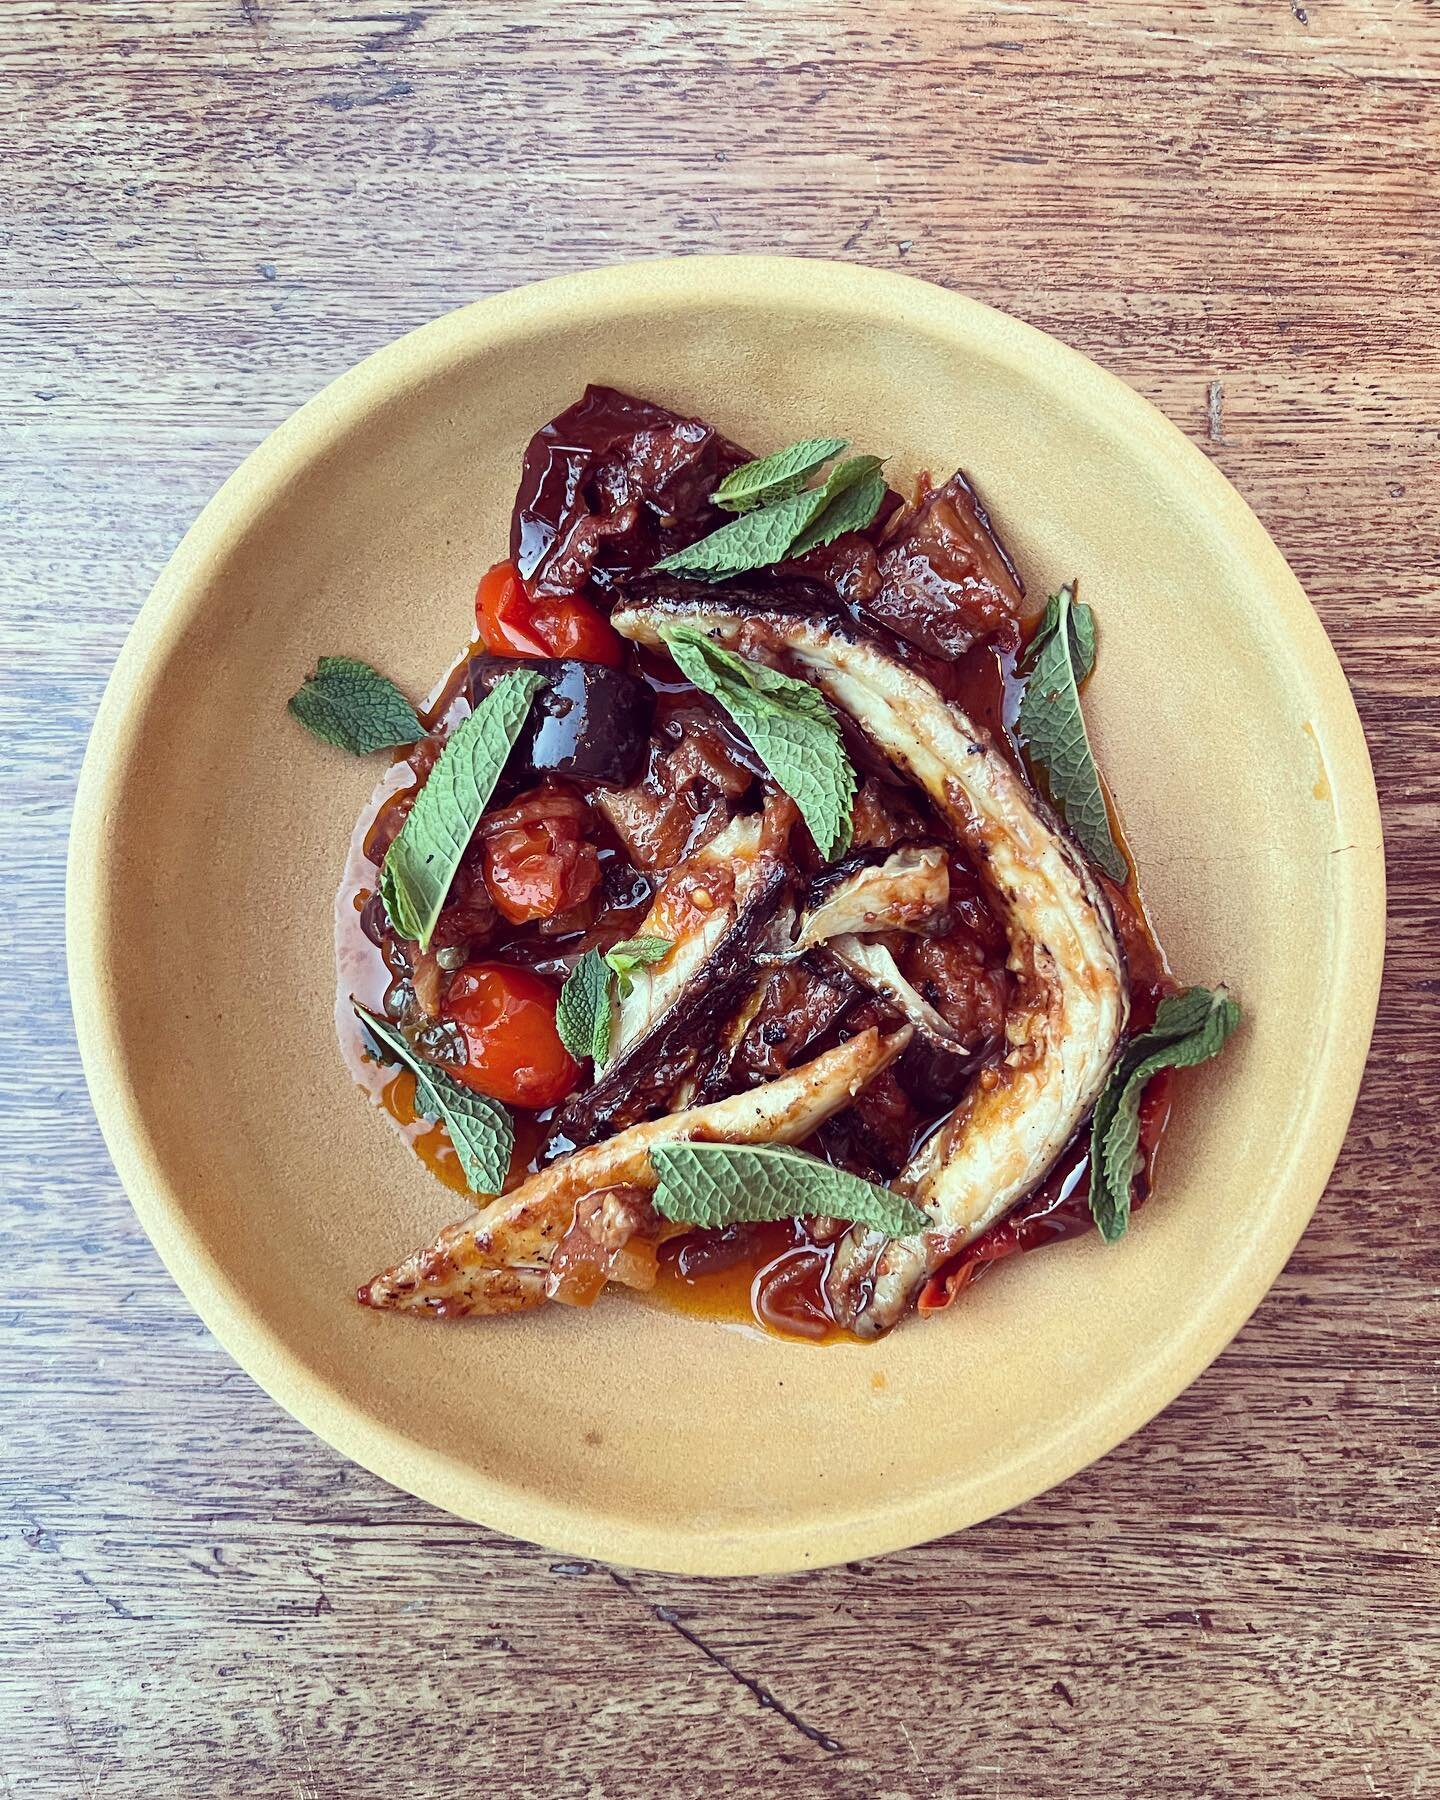 One of many delicious recipes Thom picked up whilst working in Sicily - Palermo style caponata with cured &amp; grilled mackerel.. on the menu for the next week or two! @thomeagle 

#palermo #sicily to #margate #caponata di #sgombro #sicilia #sudital